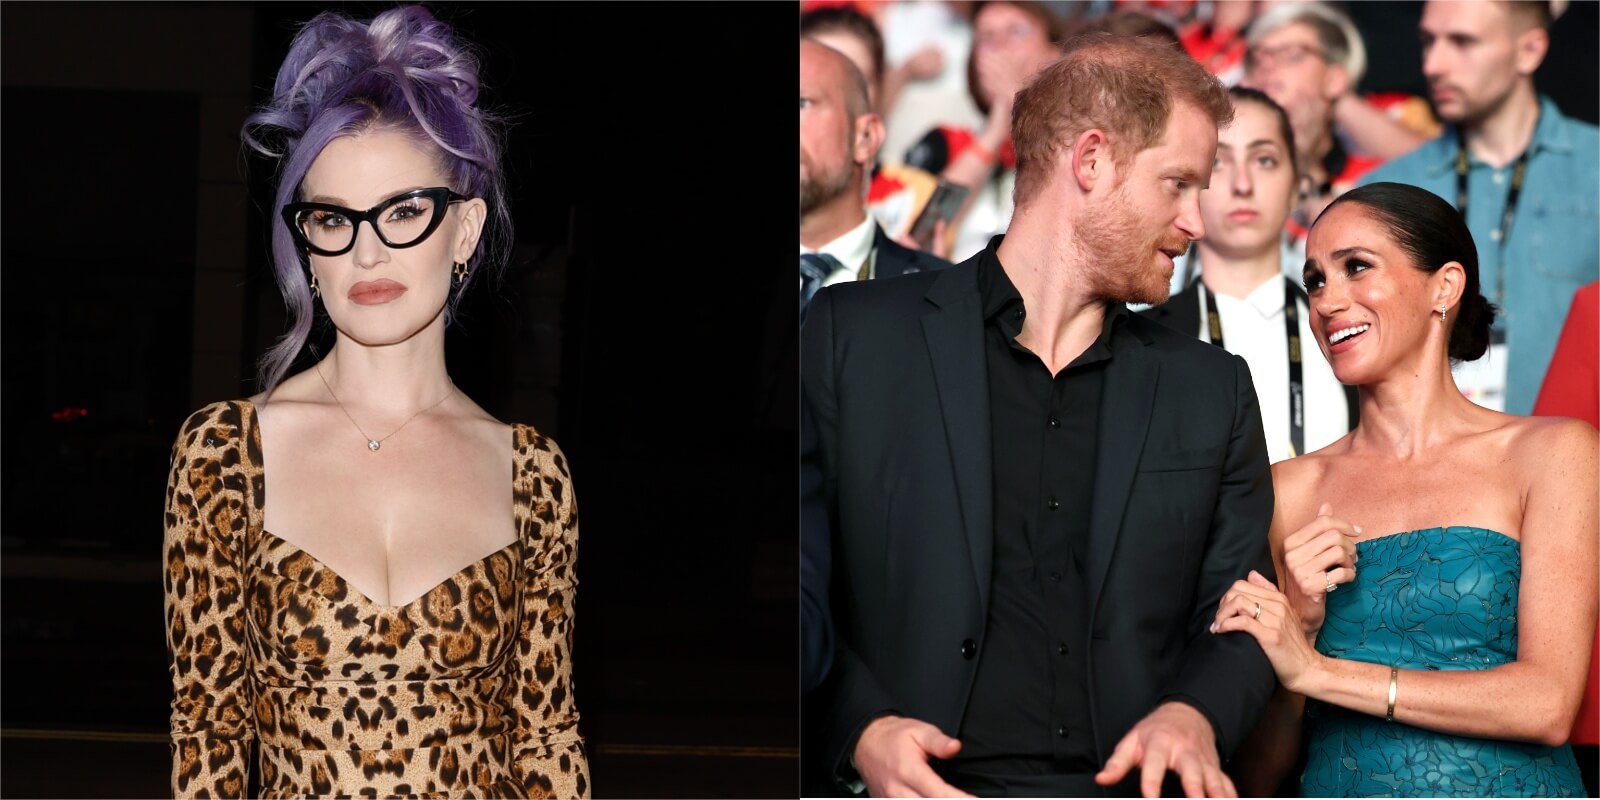 Kelly Osbourne in a side-by-side photograph with Prince Harry and Meghan Markle.